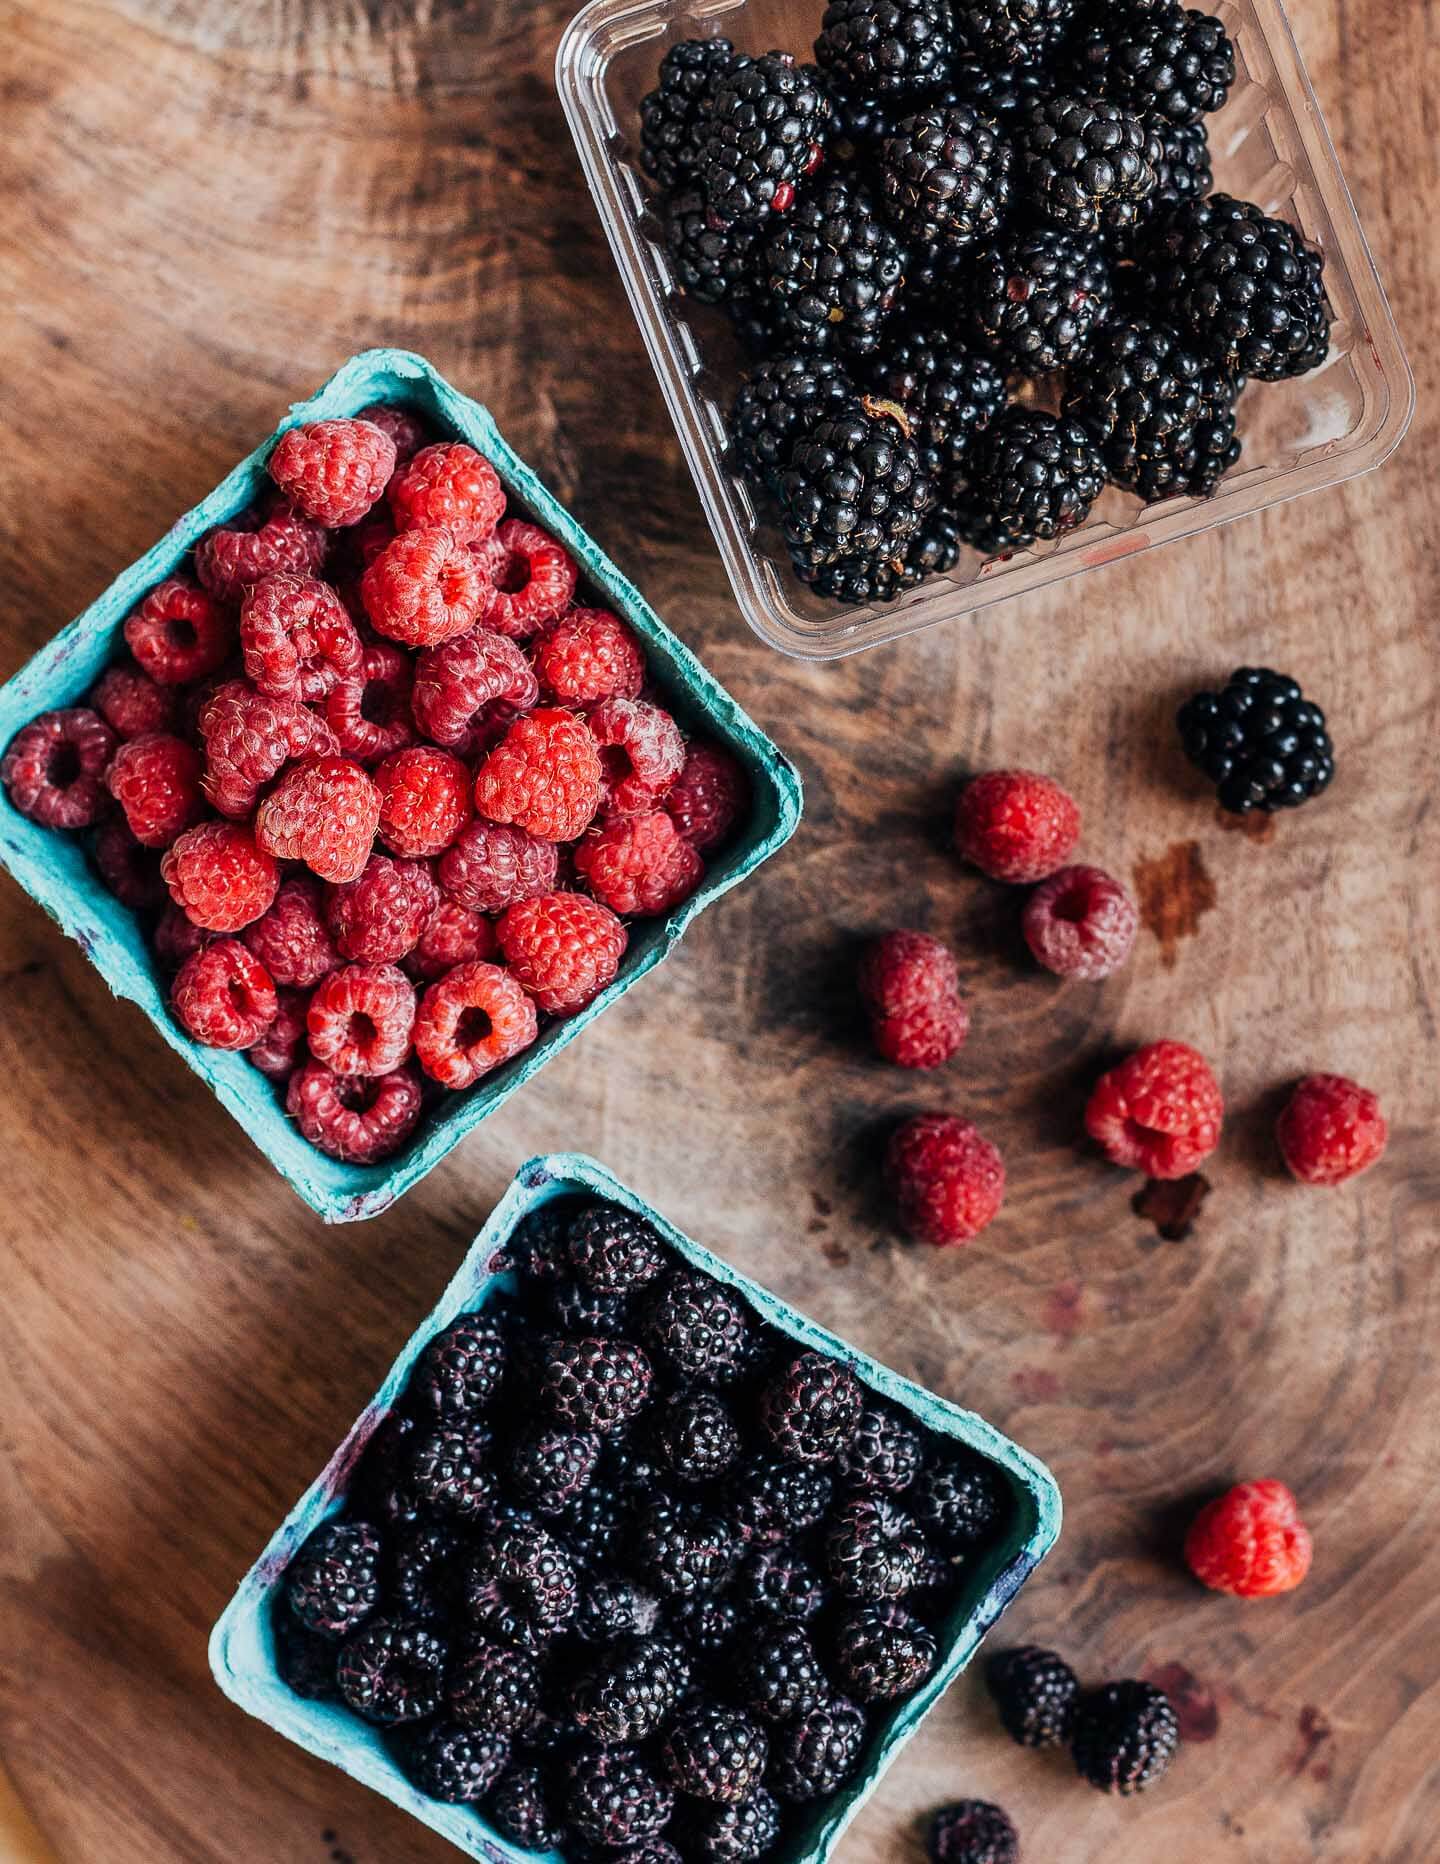 Baskets filled with berries.